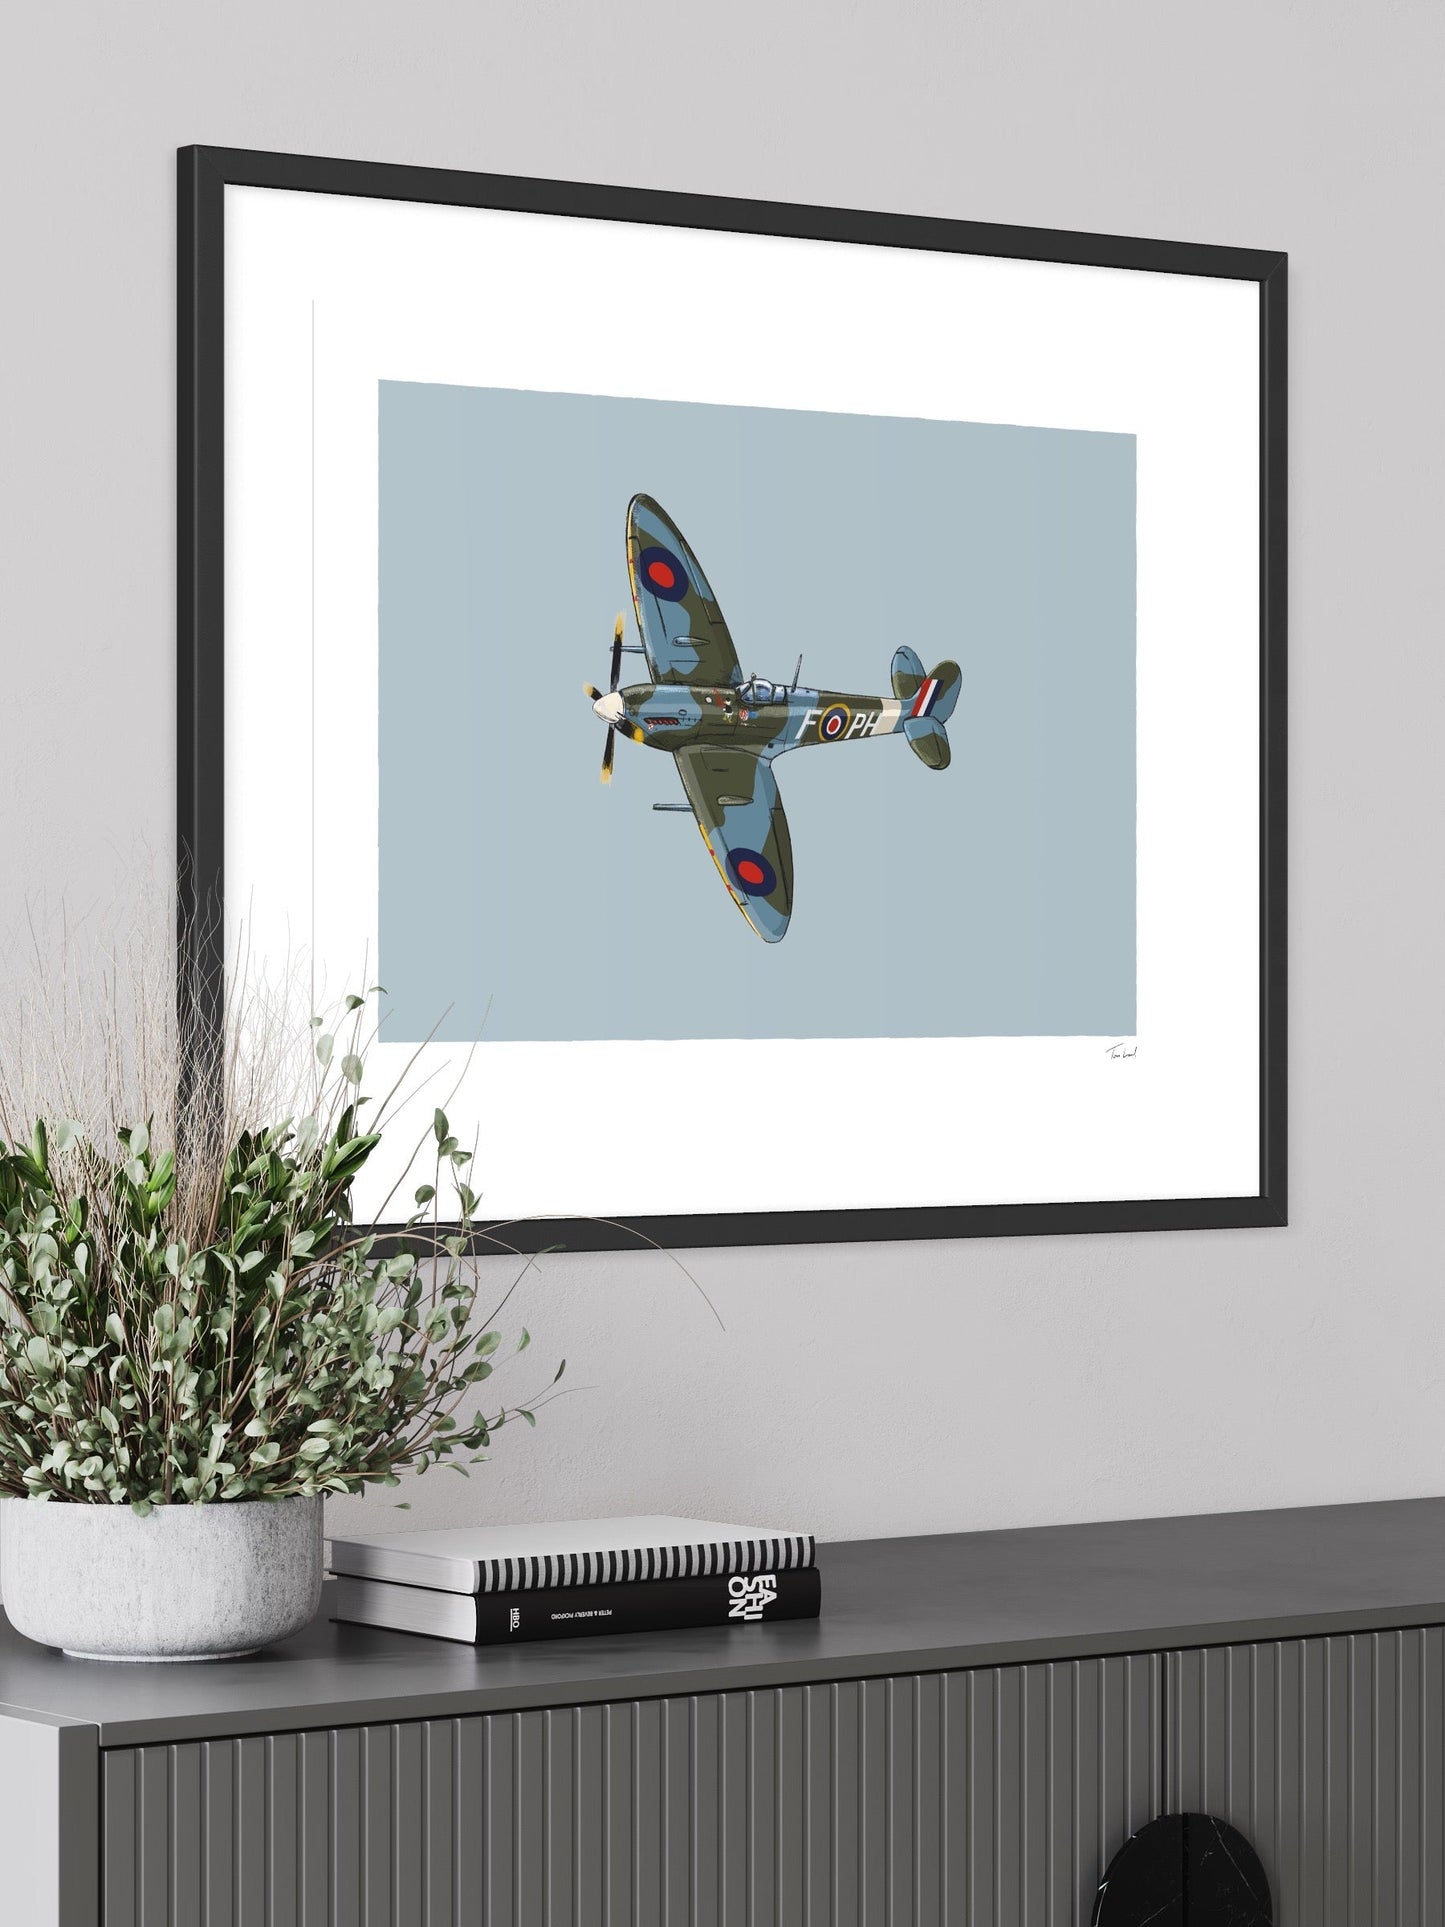 This image shows a giclee wall art print by Tom Laird Illustration of the British classic plane, the Spitfire, framed in a beautiful living room with tasteful modern home decor. This art print is available from Tom Laird Illustration in a variety of sizes.